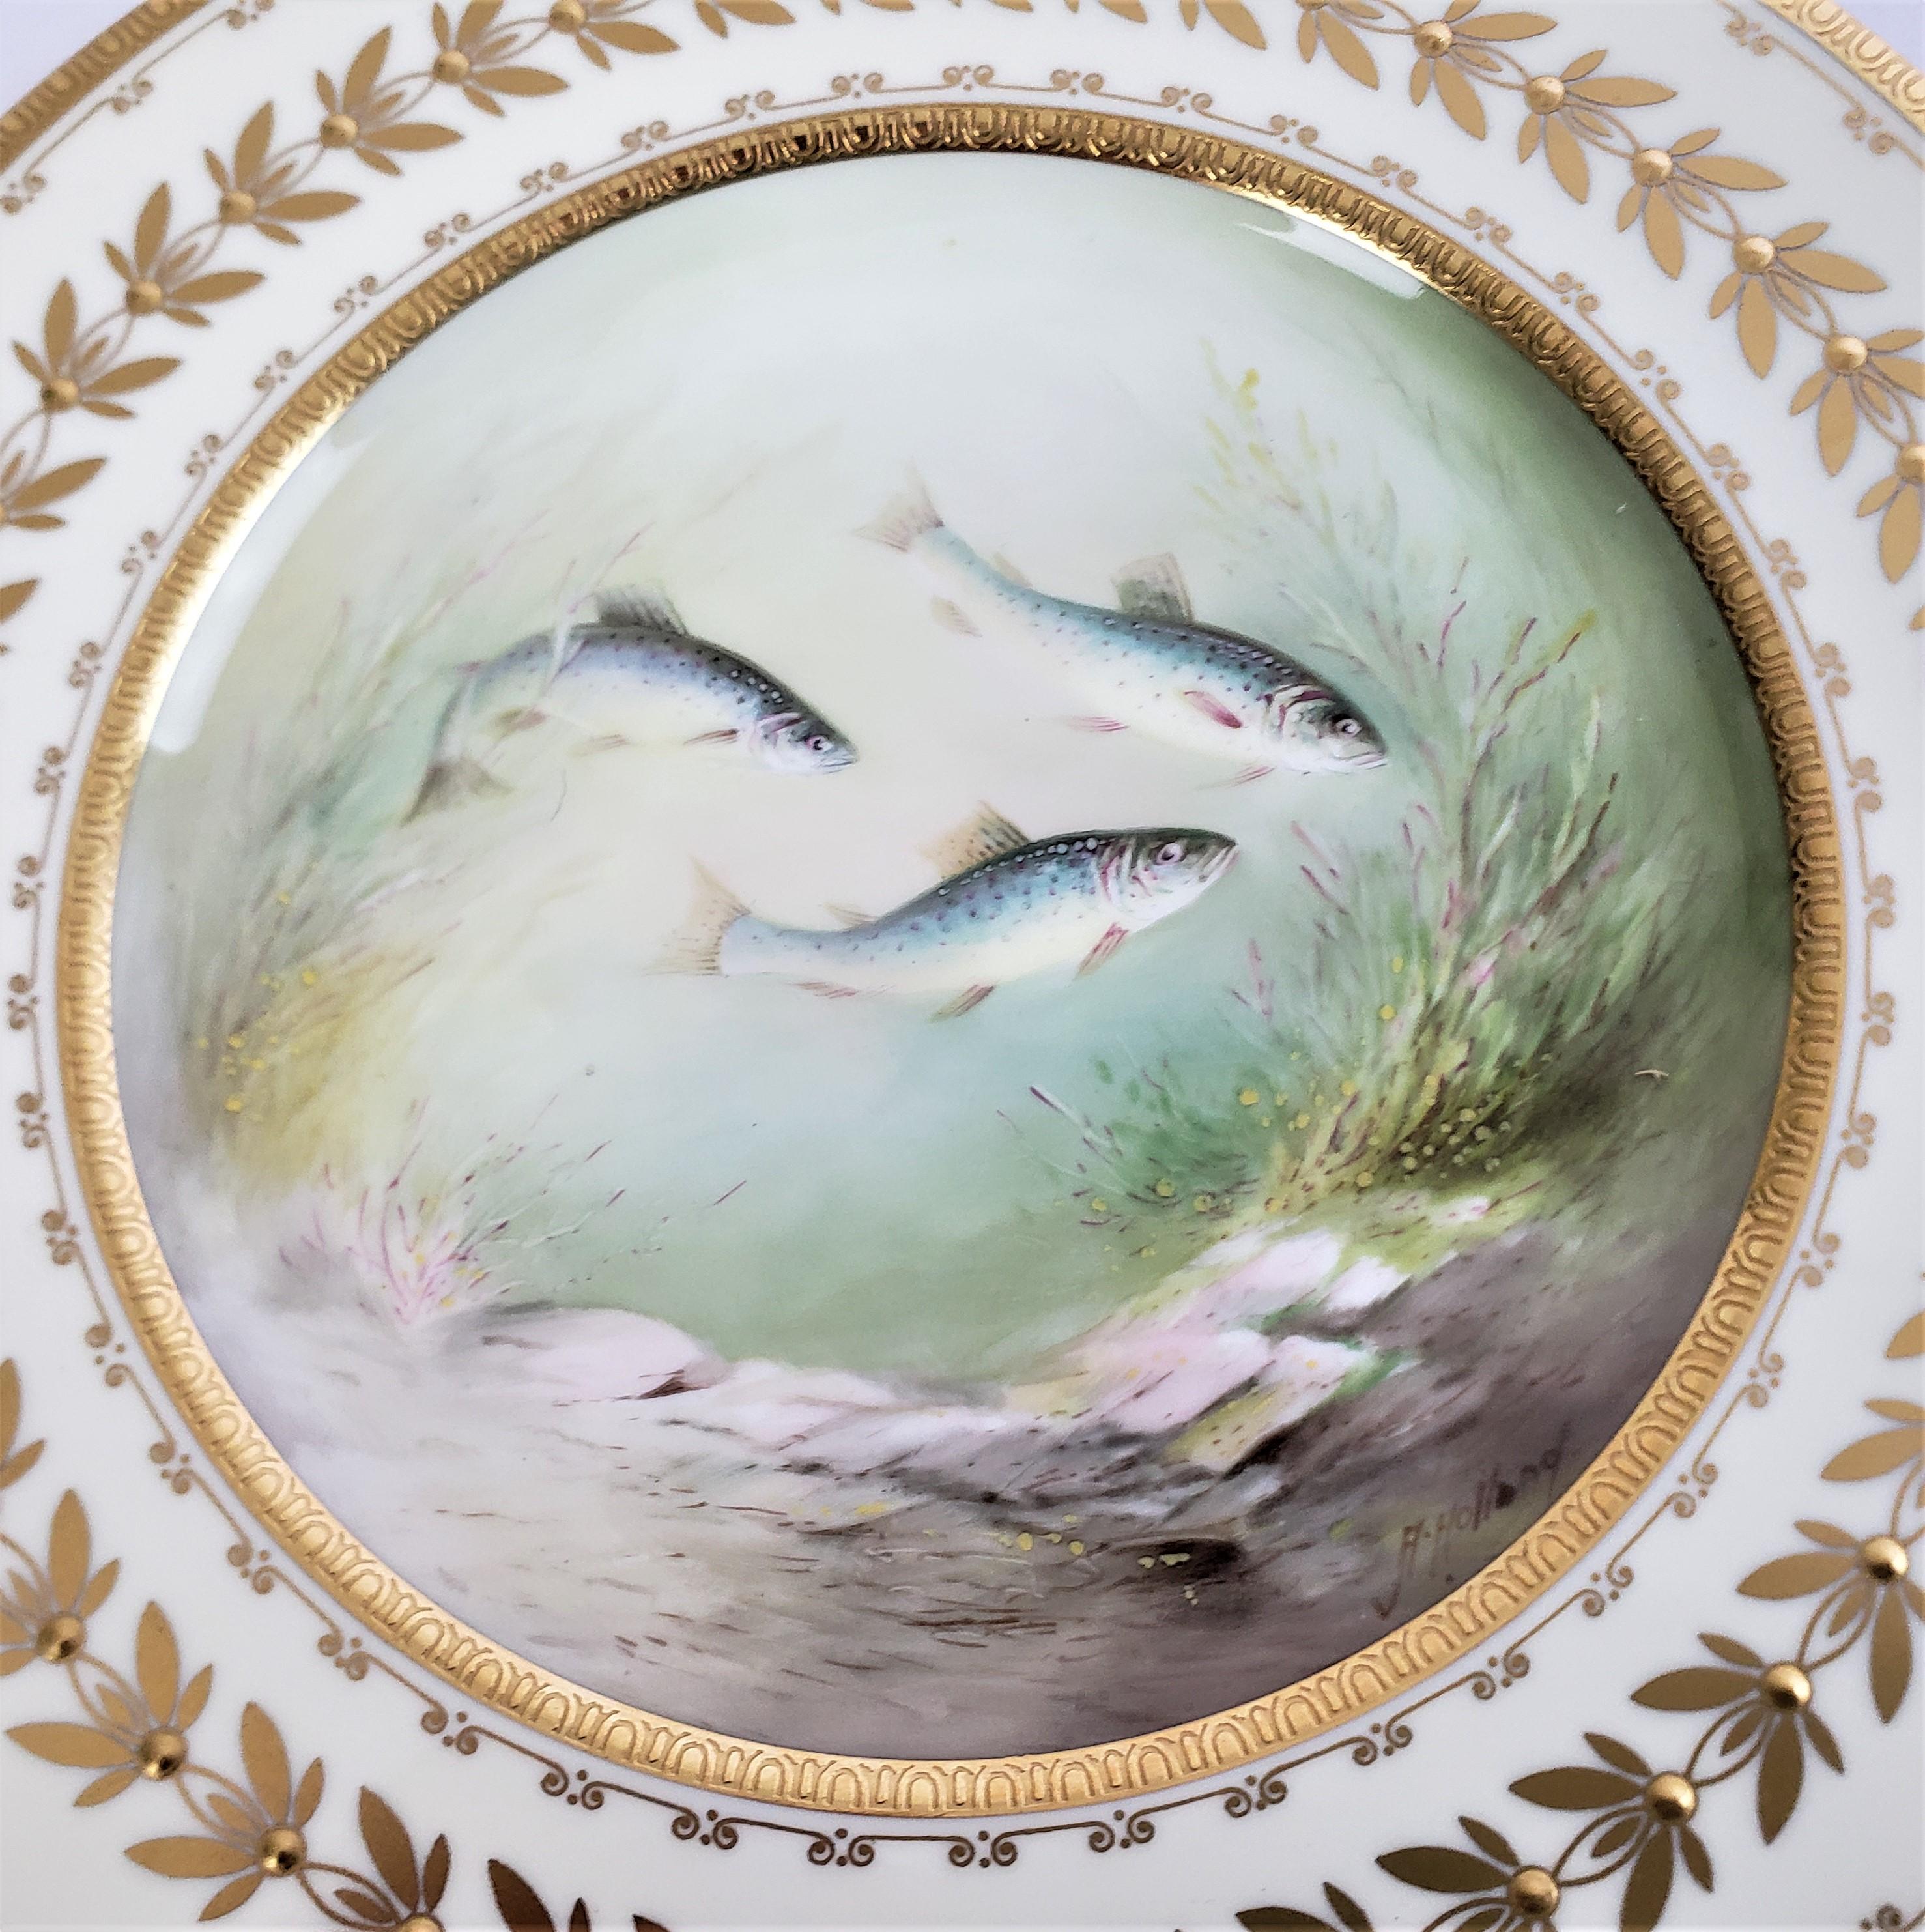 12 Antique Minton Hand-Painted Cabinet Plates Signed A. Holland Depicting Fish In Good Condition For Sale In Hamilton, Ontario